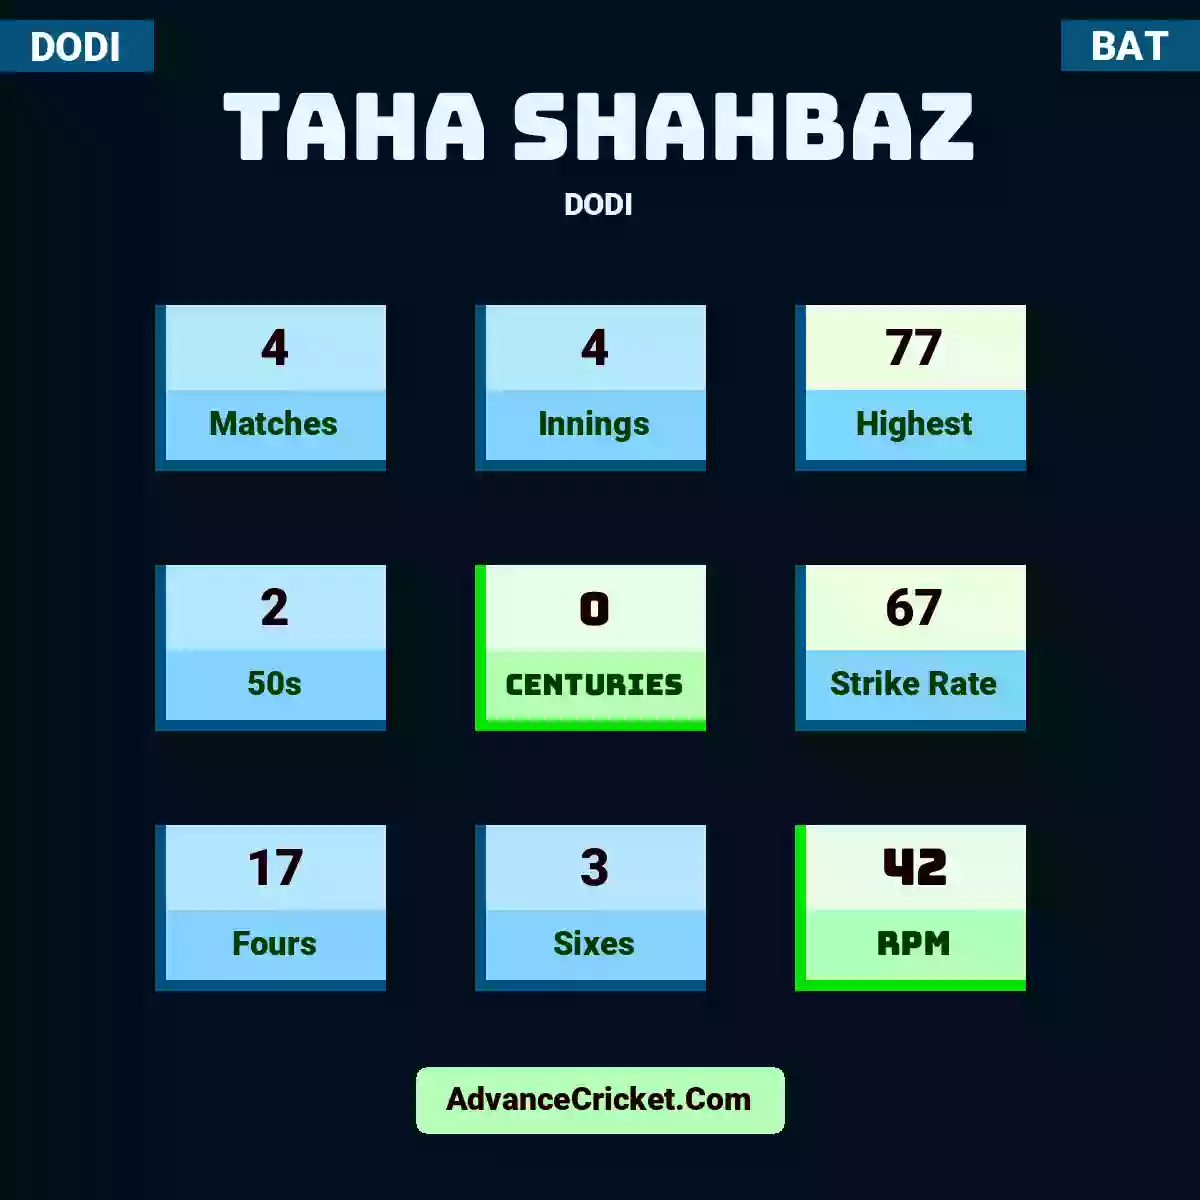 Taha Shahbaz DODI , Taha Shahbaz played 4 matches, scored 77 runs as highest, 2 half-centuries, and 0 centuries, with a strike rate of 67. T.Shahbaz hit 17 fours and 3 sixes, with an RPM of 42.